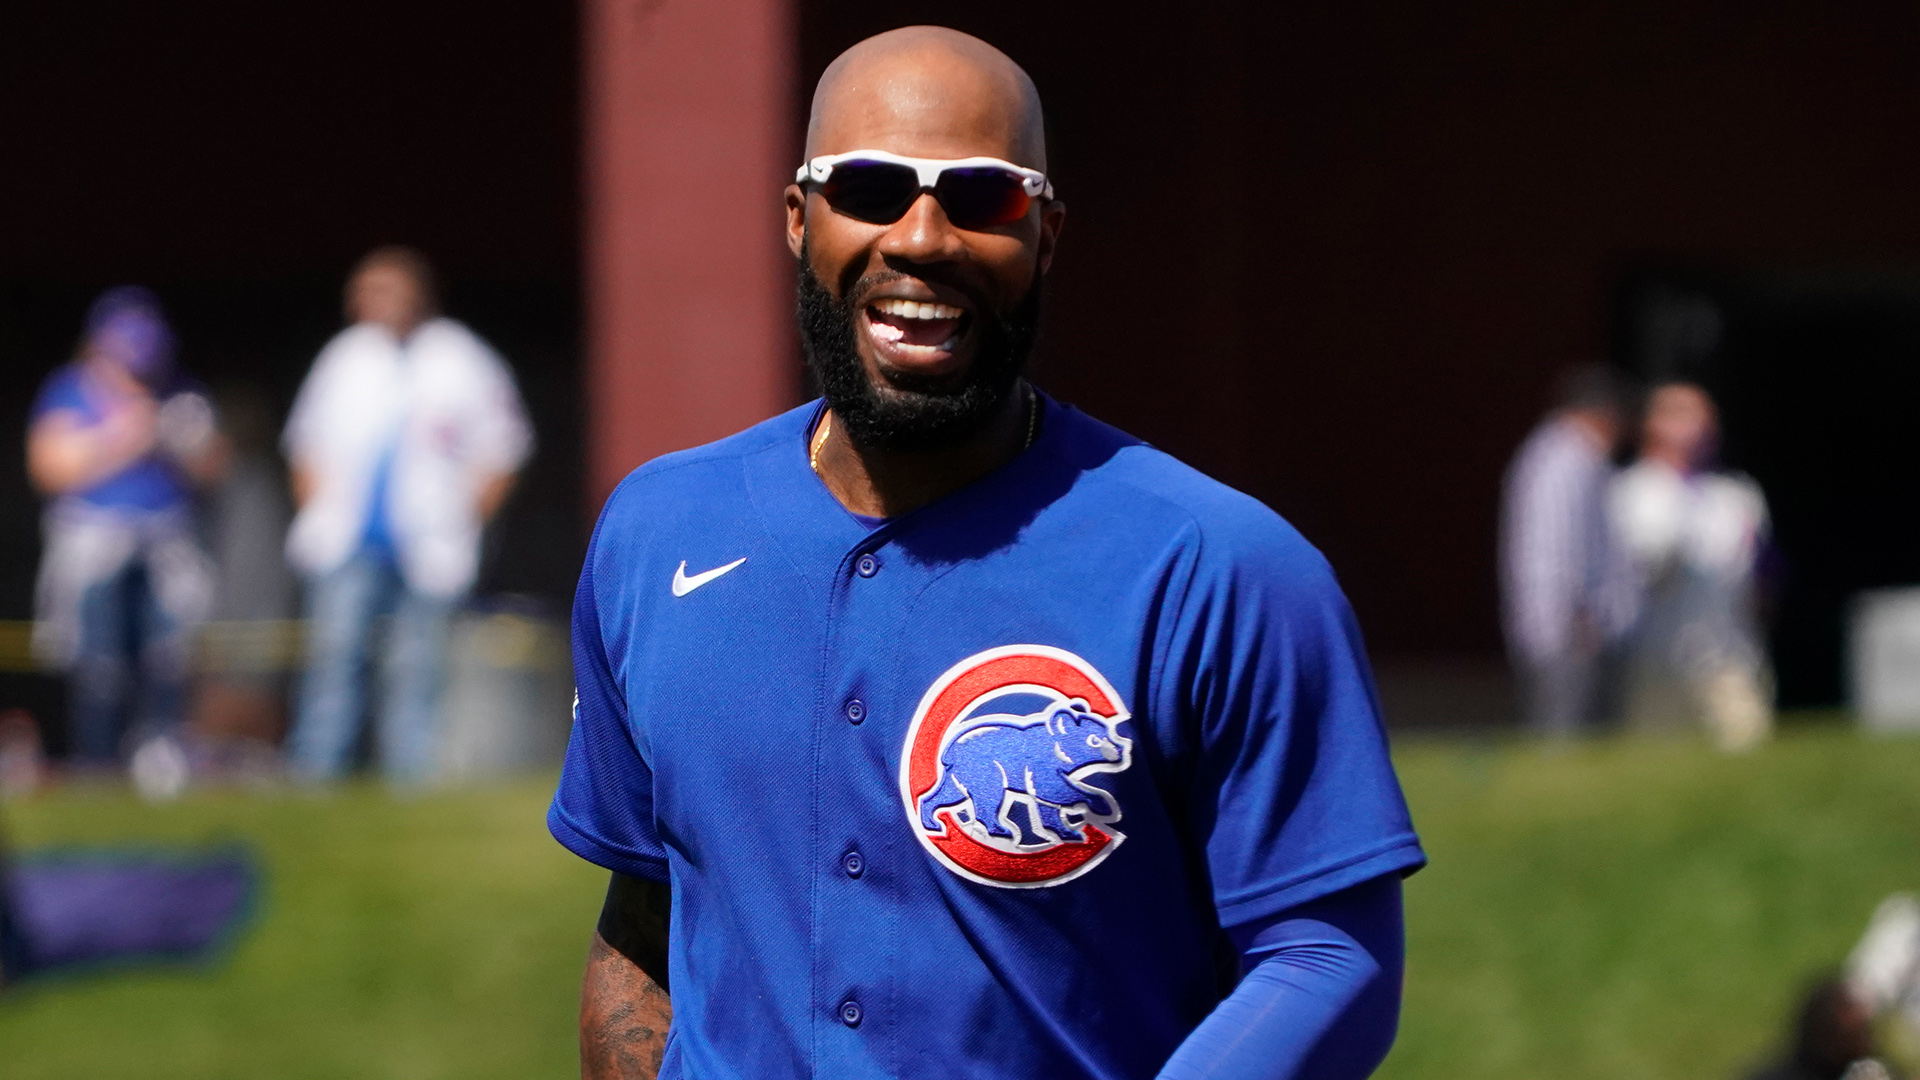 Cubs: Patrick Wisdom exits game after collision at first base (Video)